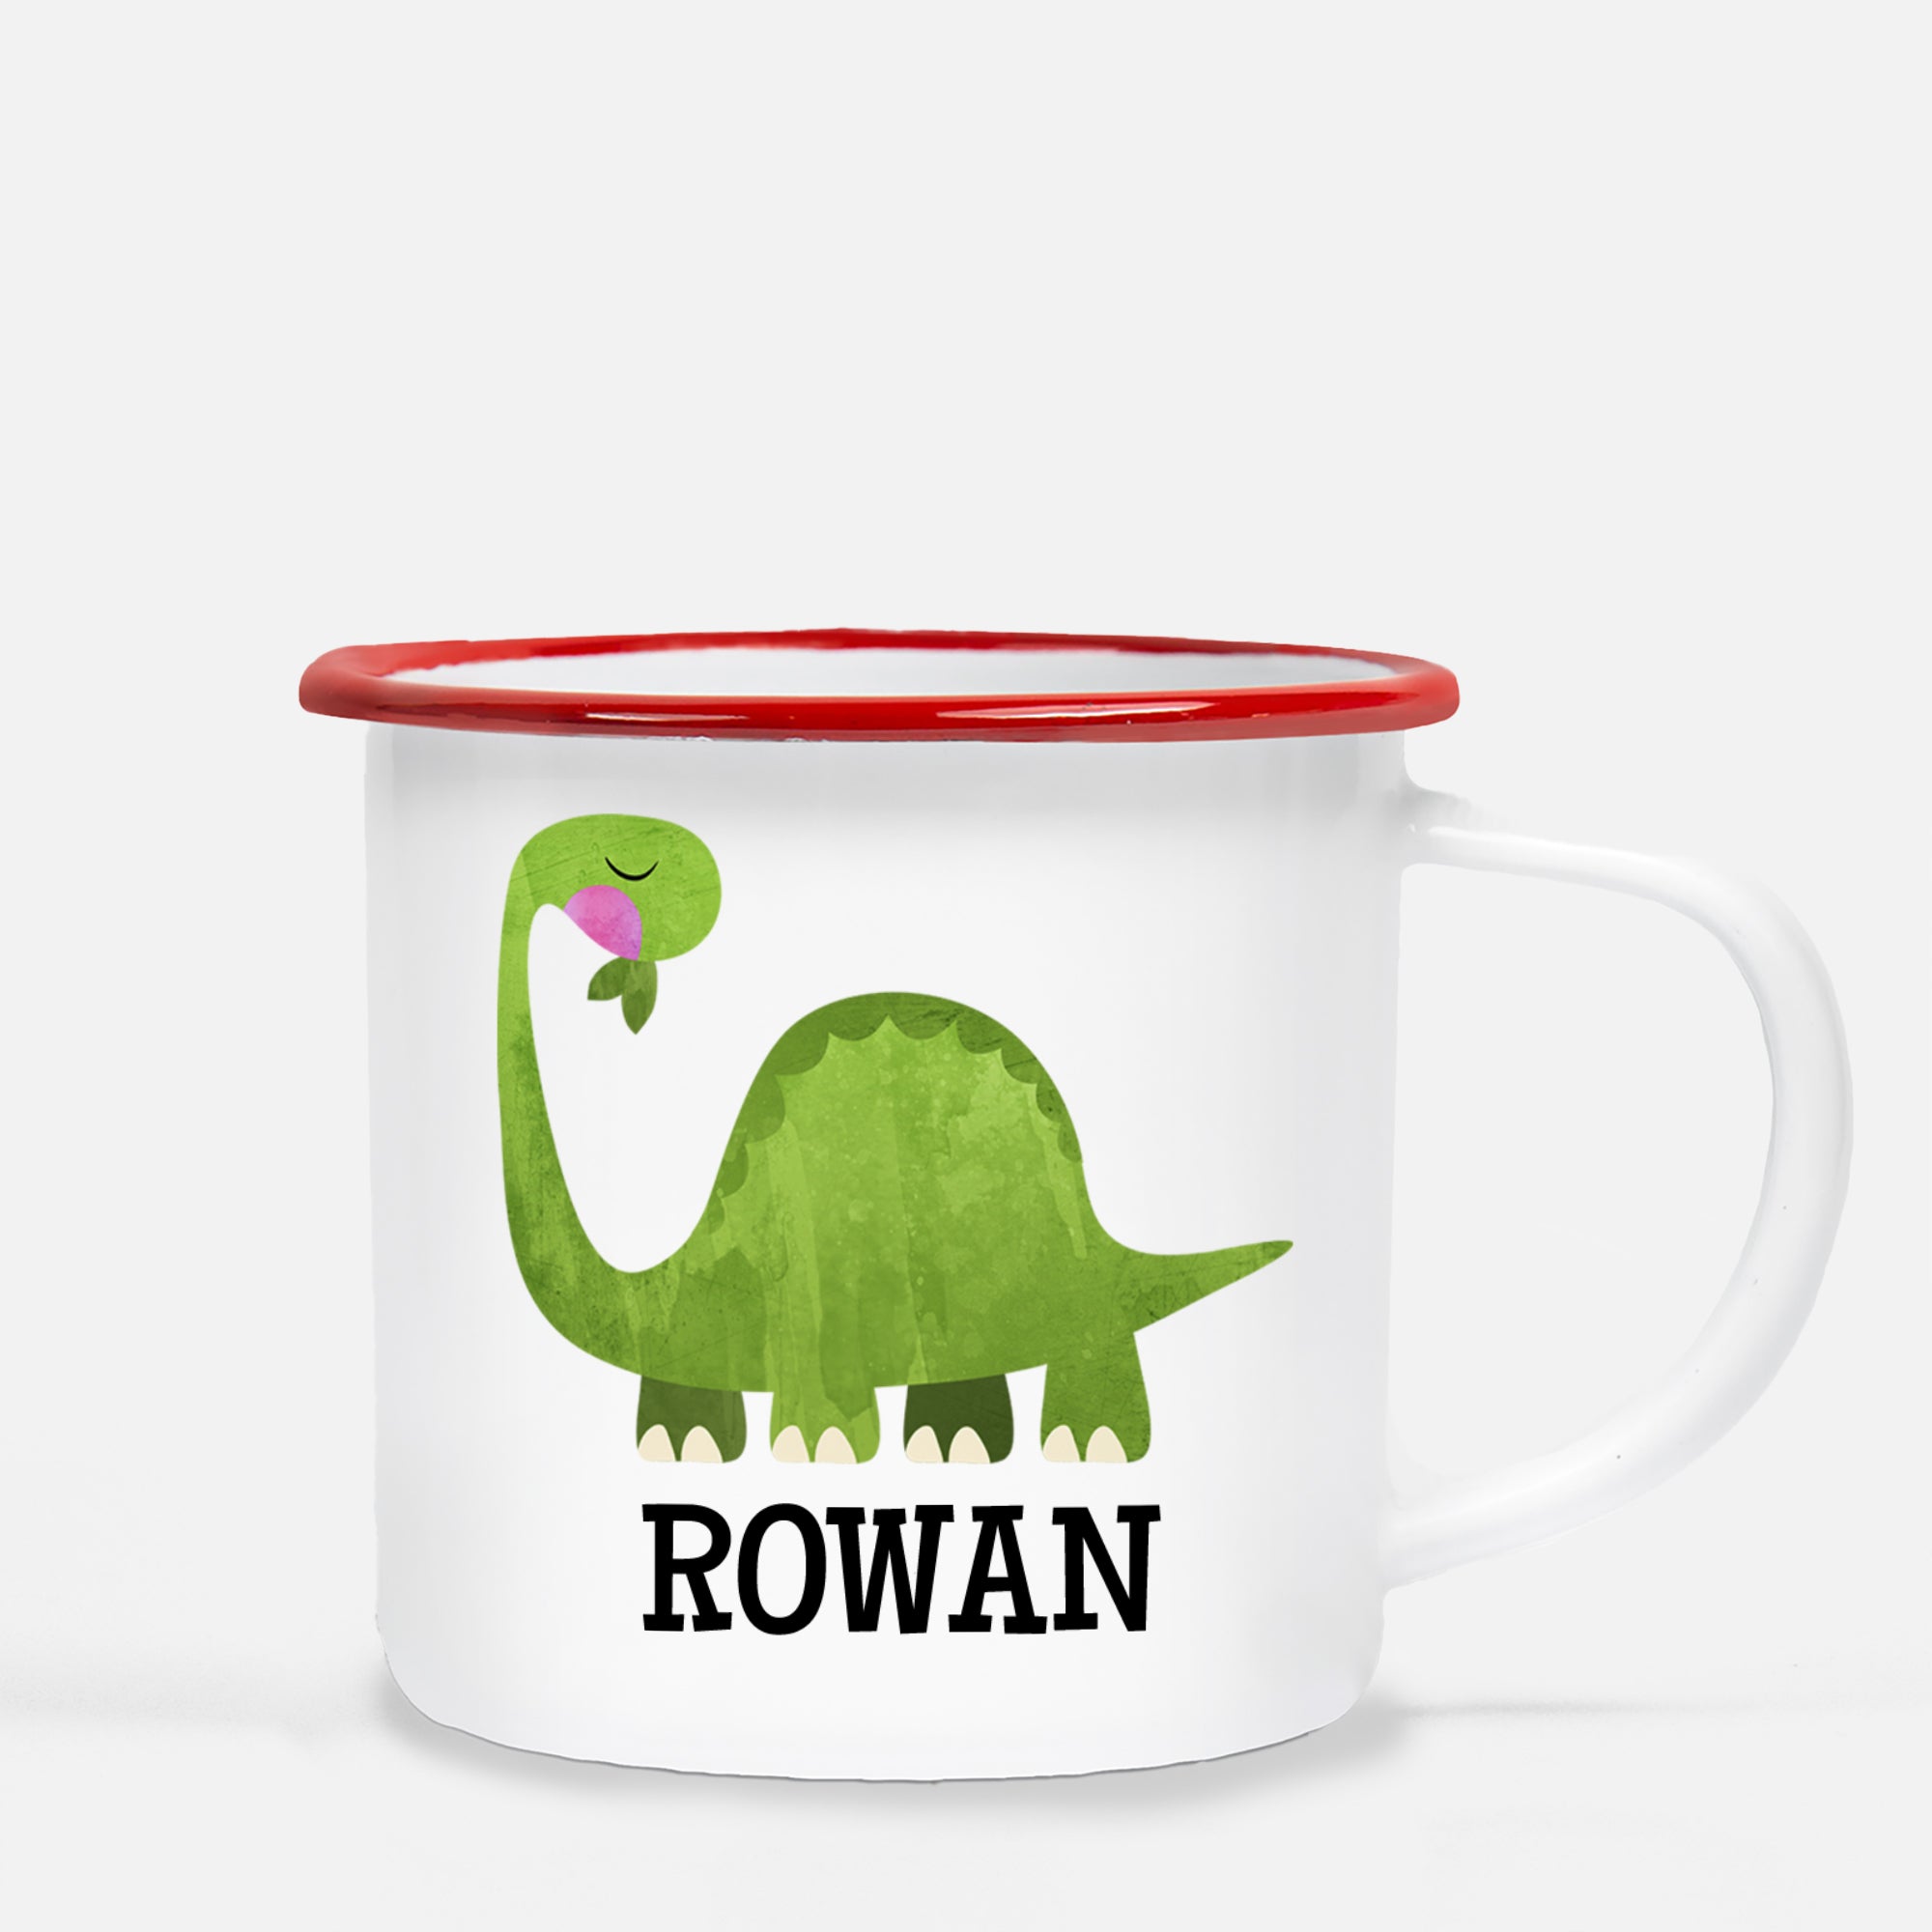 Dinosaur Camp Mug, Brontosaurus, Personalized with your Child's name, PIPSY.COM, red lip